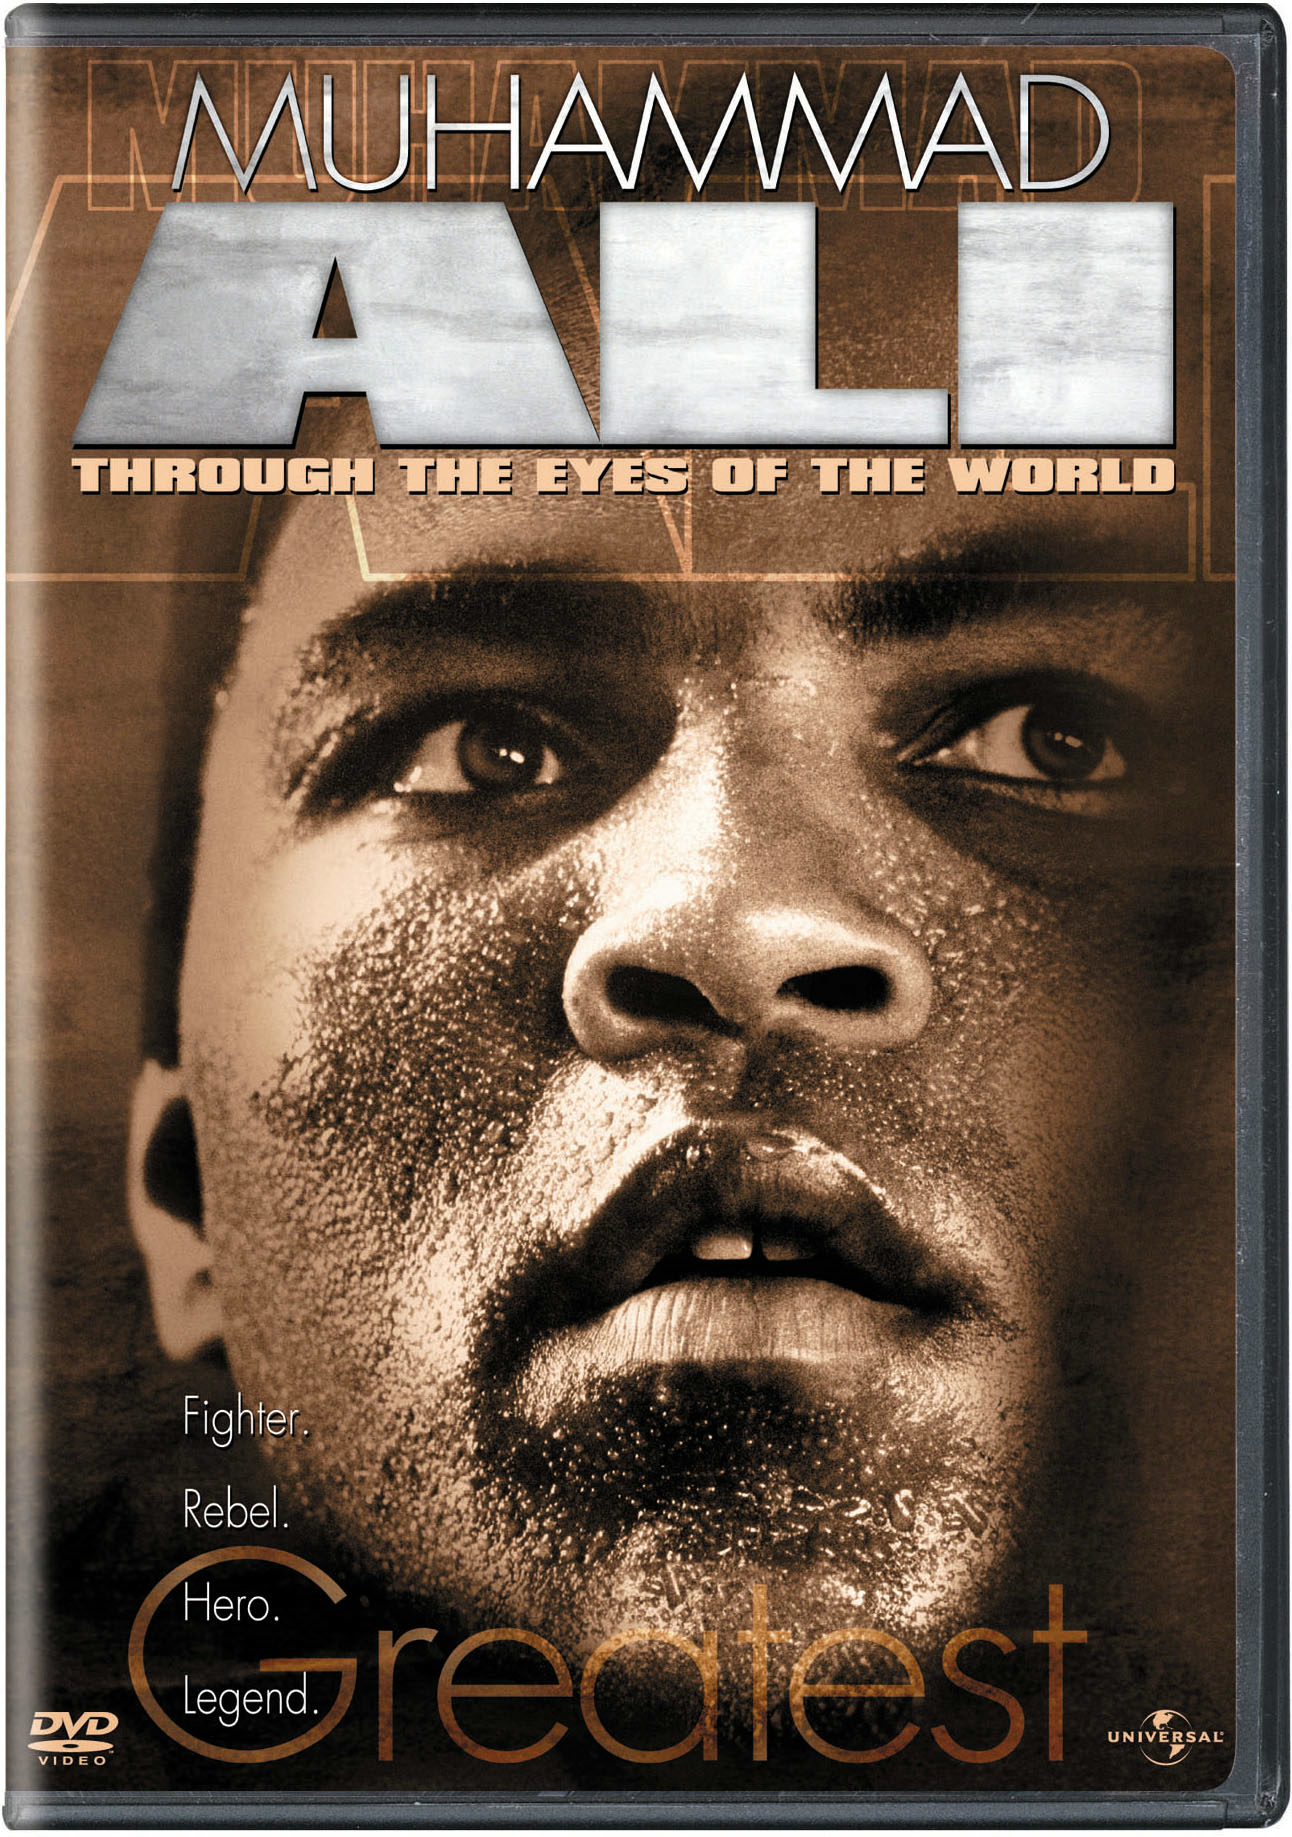 Muhammad Ali: Through The Eyes Of The World - DVD [ 2001 ]  - Boxing Sport On DVD